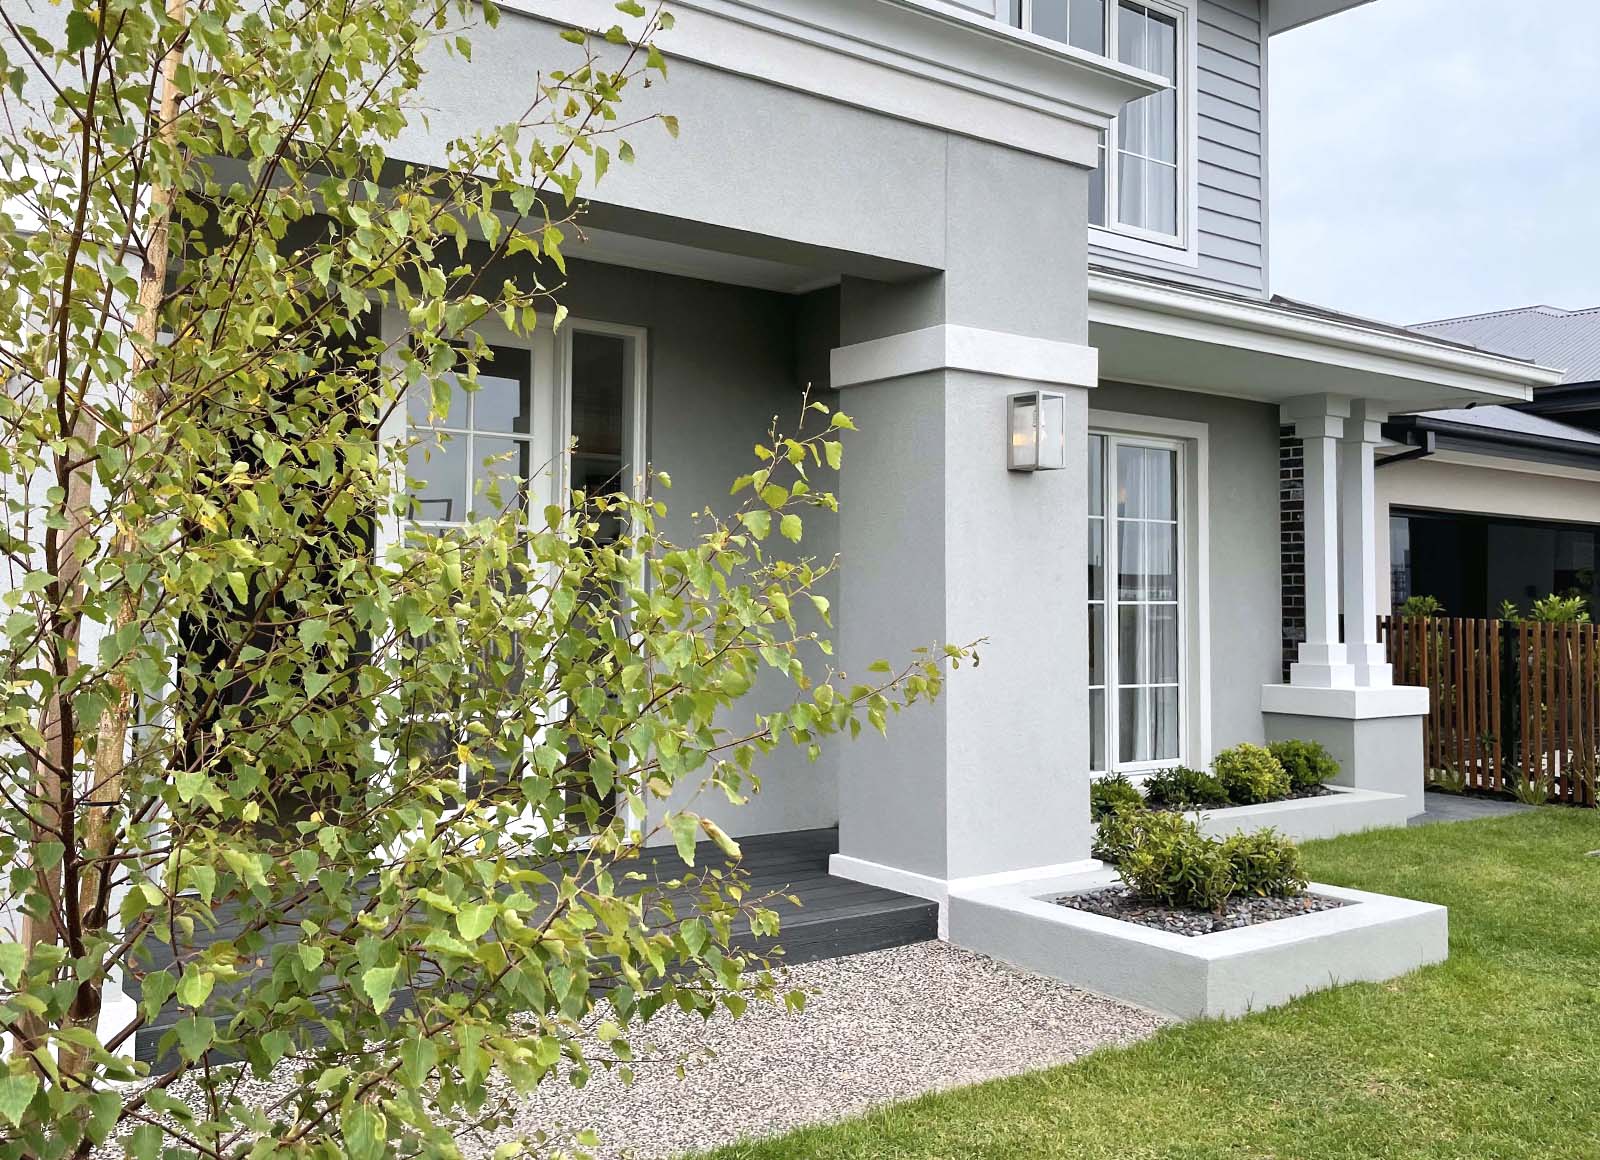 A Step-by-Step Guide to Landscaping Your New Home